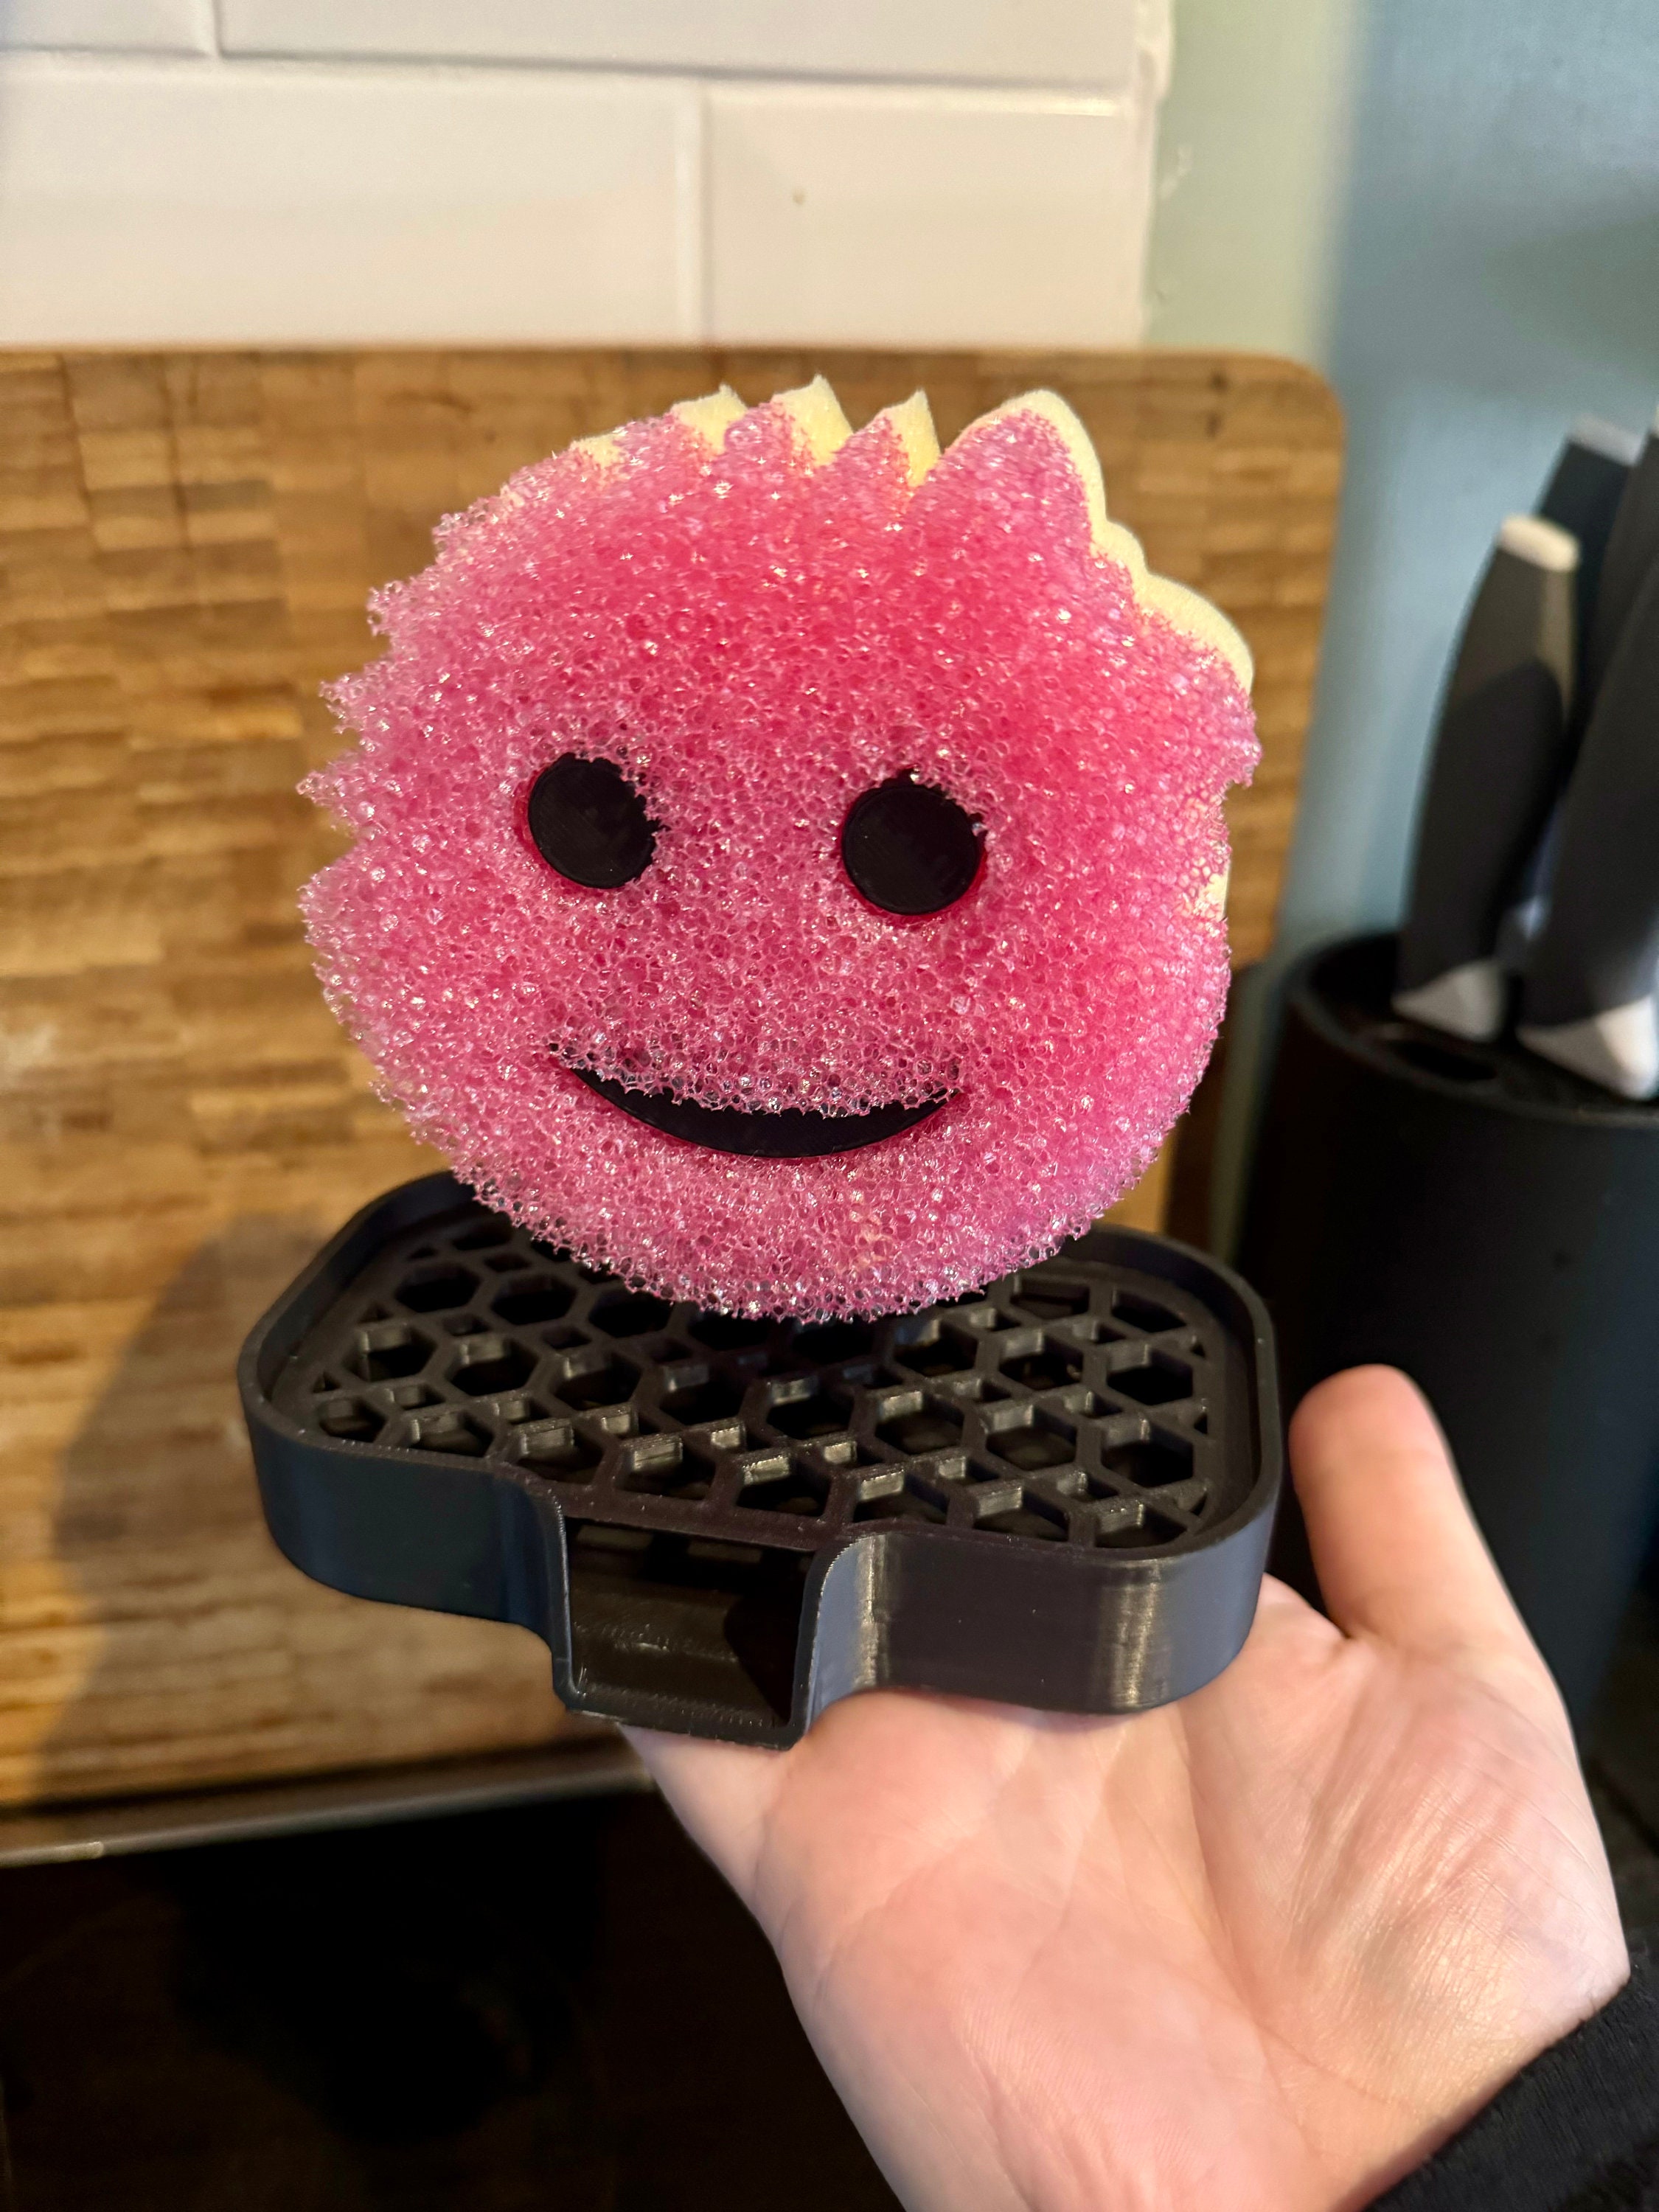 Scrub Daddy Sponge Holder - Daddy Caddy - Suction Sponge Holder for Smiley  Face Sponge , Non-Slip Suction Cups, Sink Organizer for Kitchen and  Bathroom, Self Draining, Dishwasher Safe - 1ct 1 Count (Pack of 1)